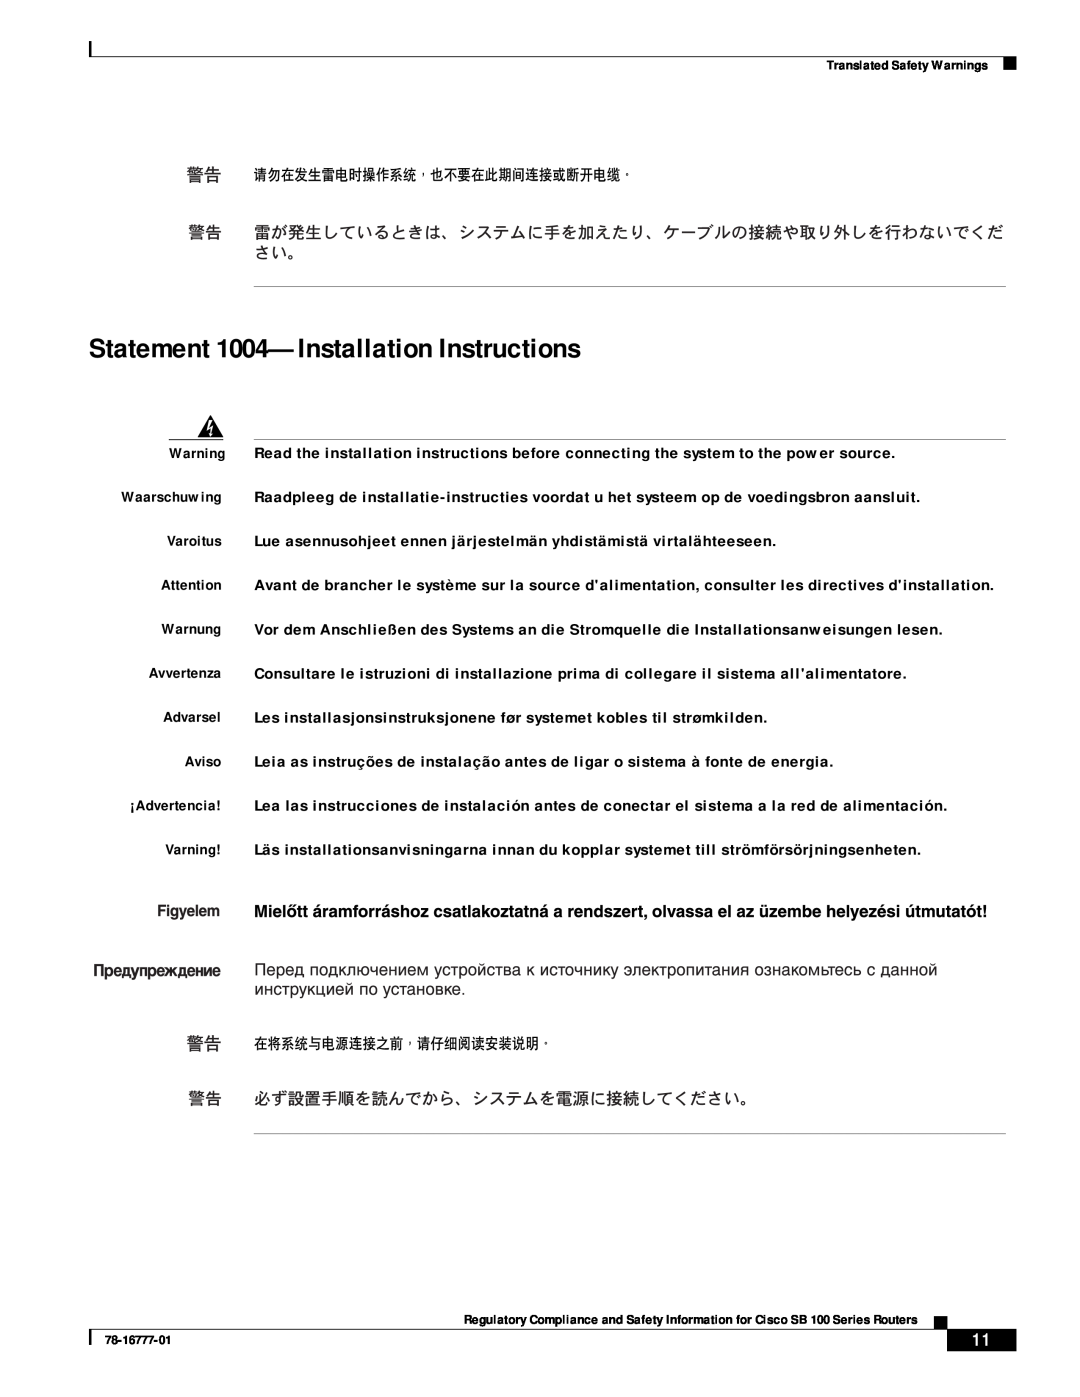 Cisco Systems SB 100 Series manual Statement 1004-Installation Instructions 